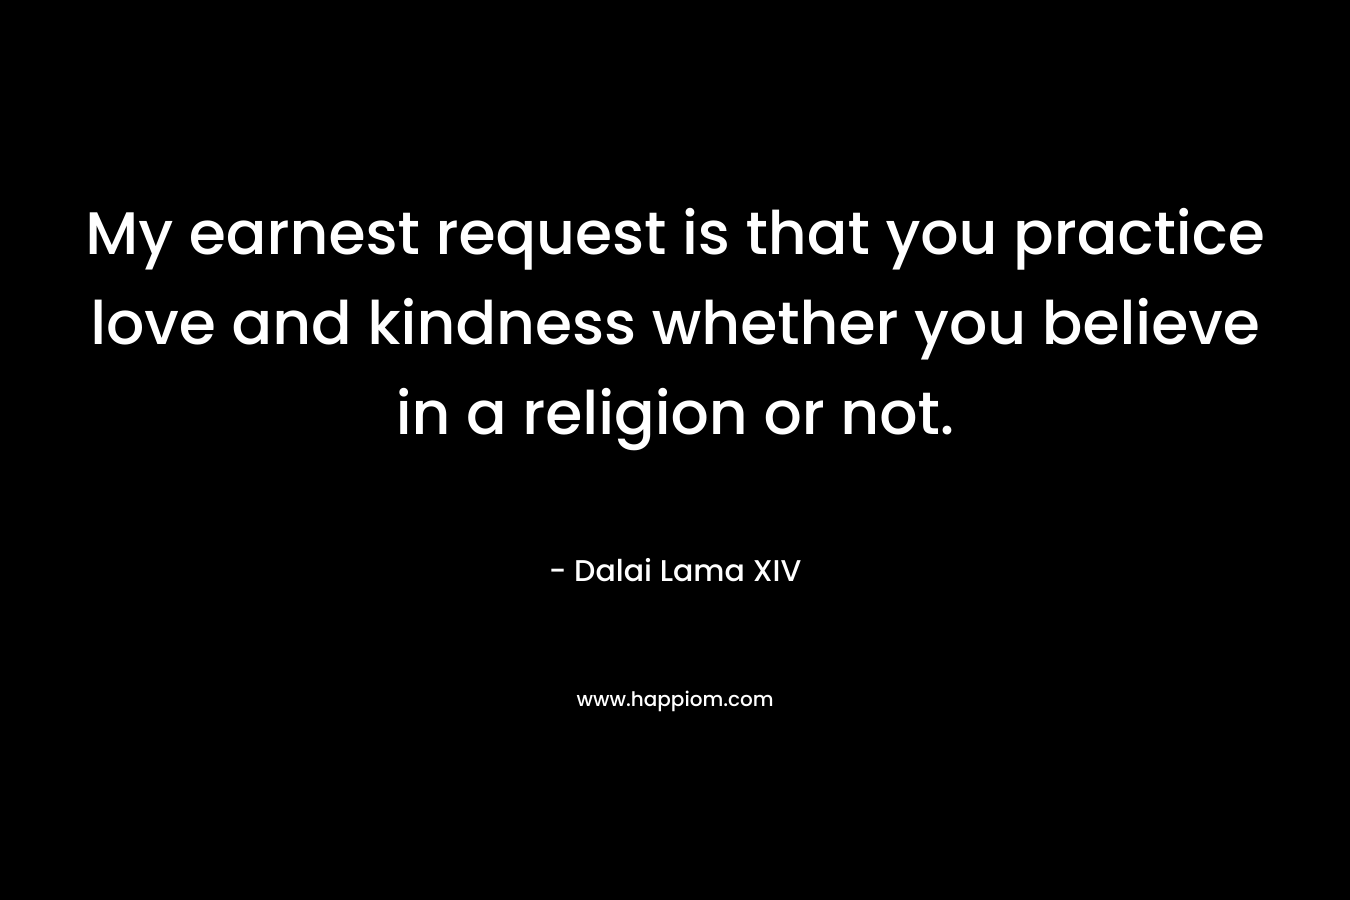 My earnest request is that you practice love and kindness whether you believe in a religion or not.